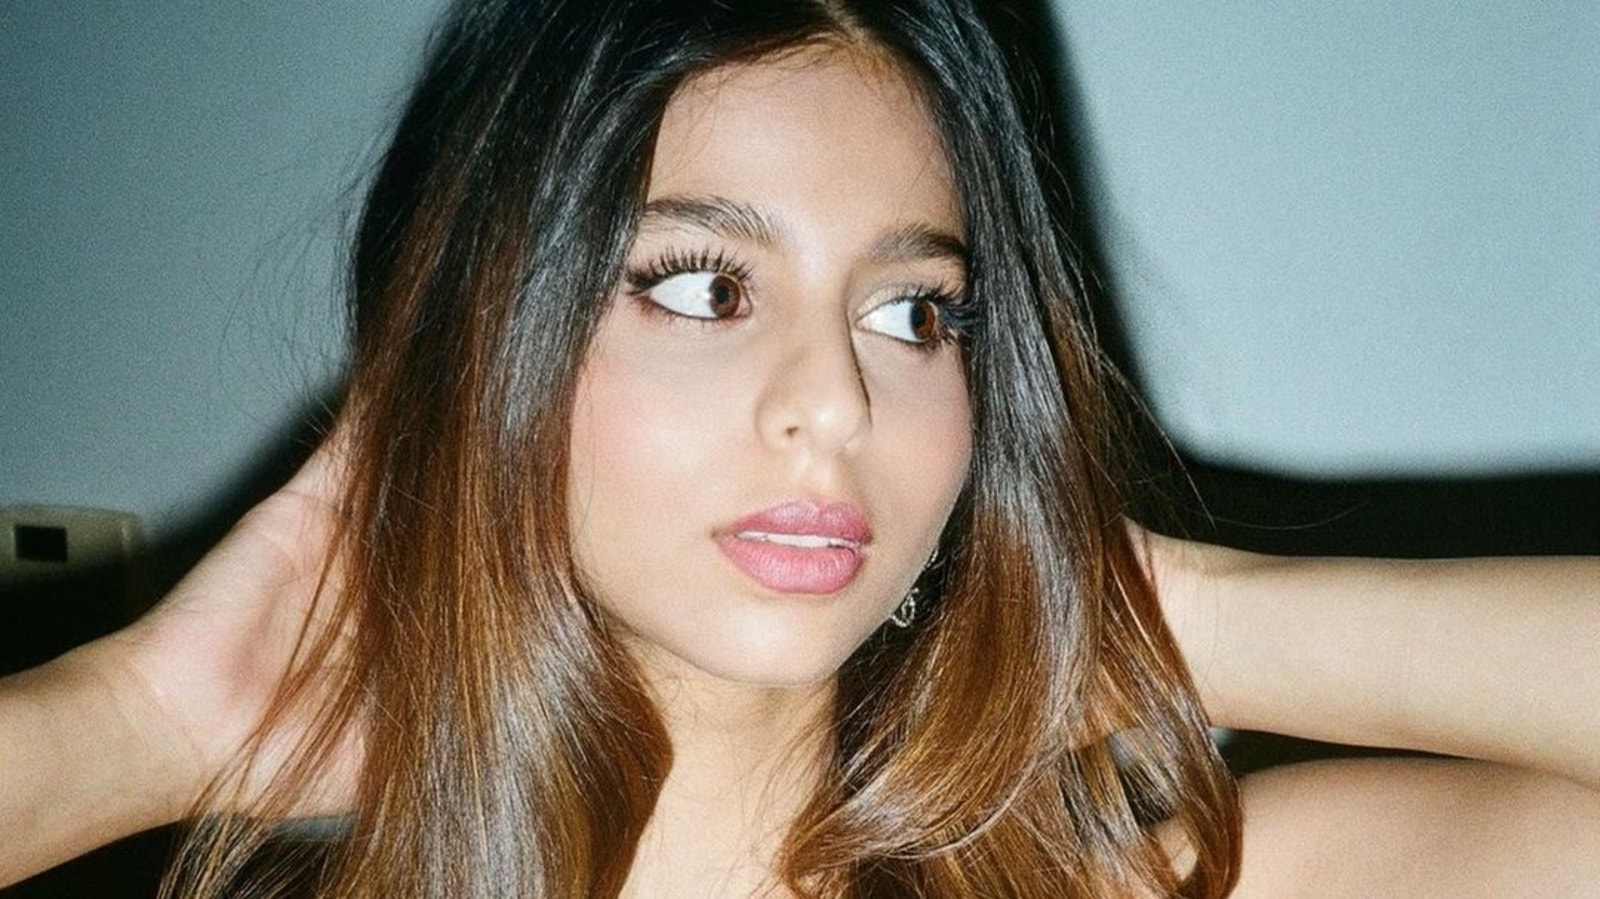 Suhana Khan Highlights Her Bling By Covering The Face In Her New Post